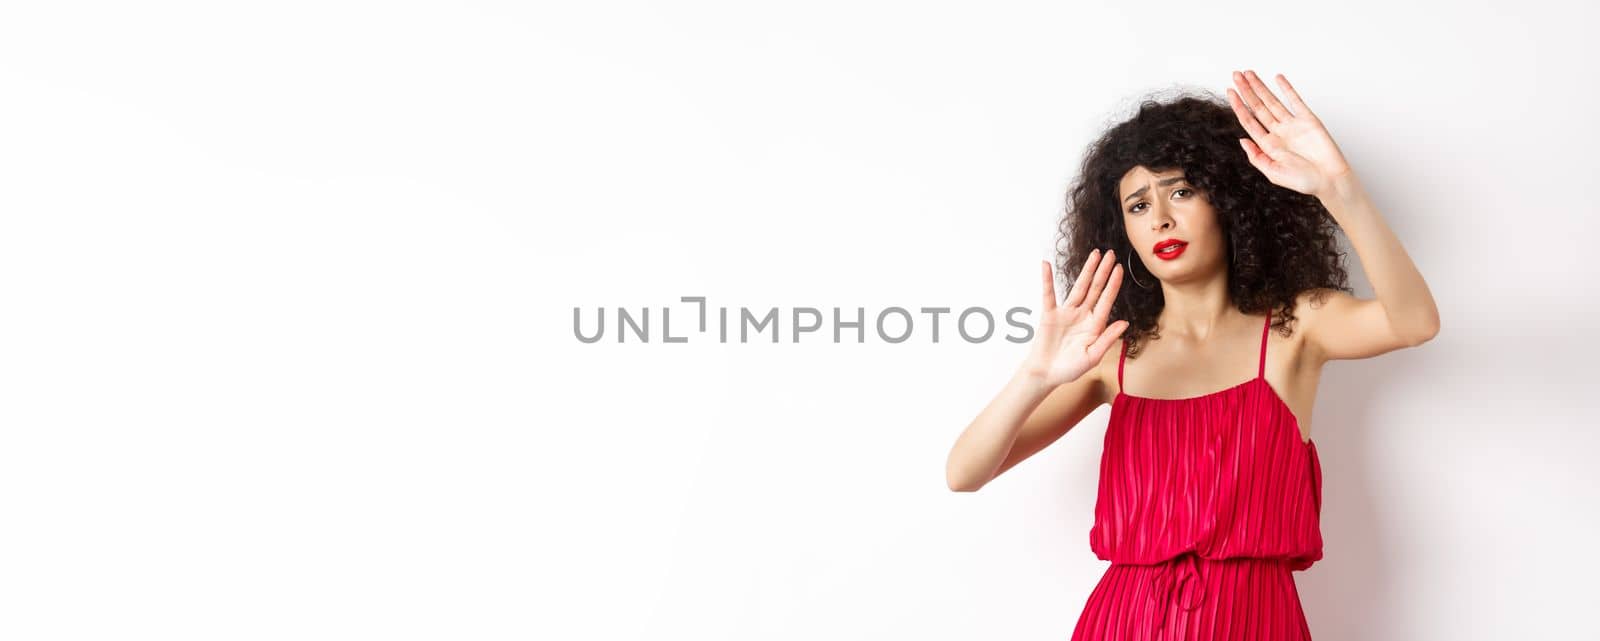 Young woman with curly hair and red dress, asking to stop, block someone, raising hands defensive, protecting herself, standing against white background.